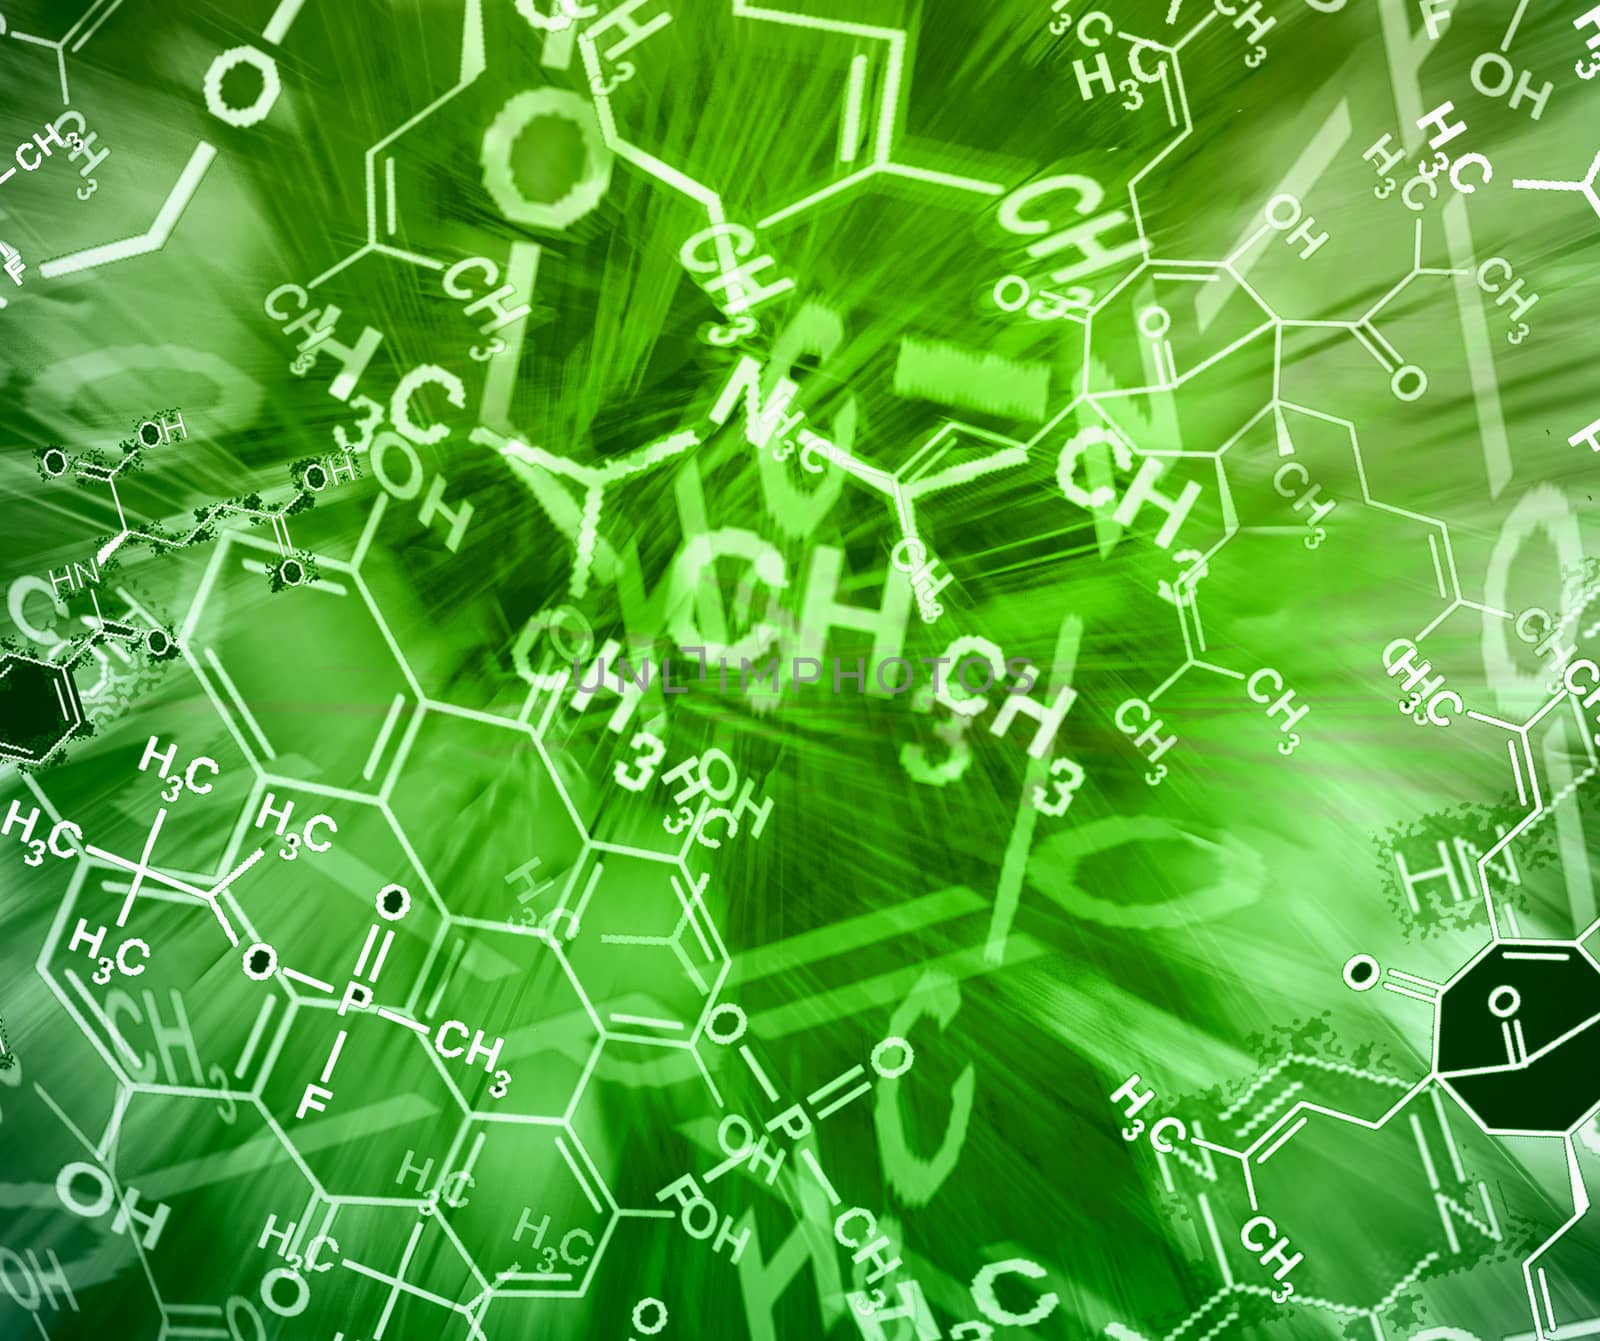 Image of chemical technology abstract background. Science wallpaper with school chemistry formulas and structures.